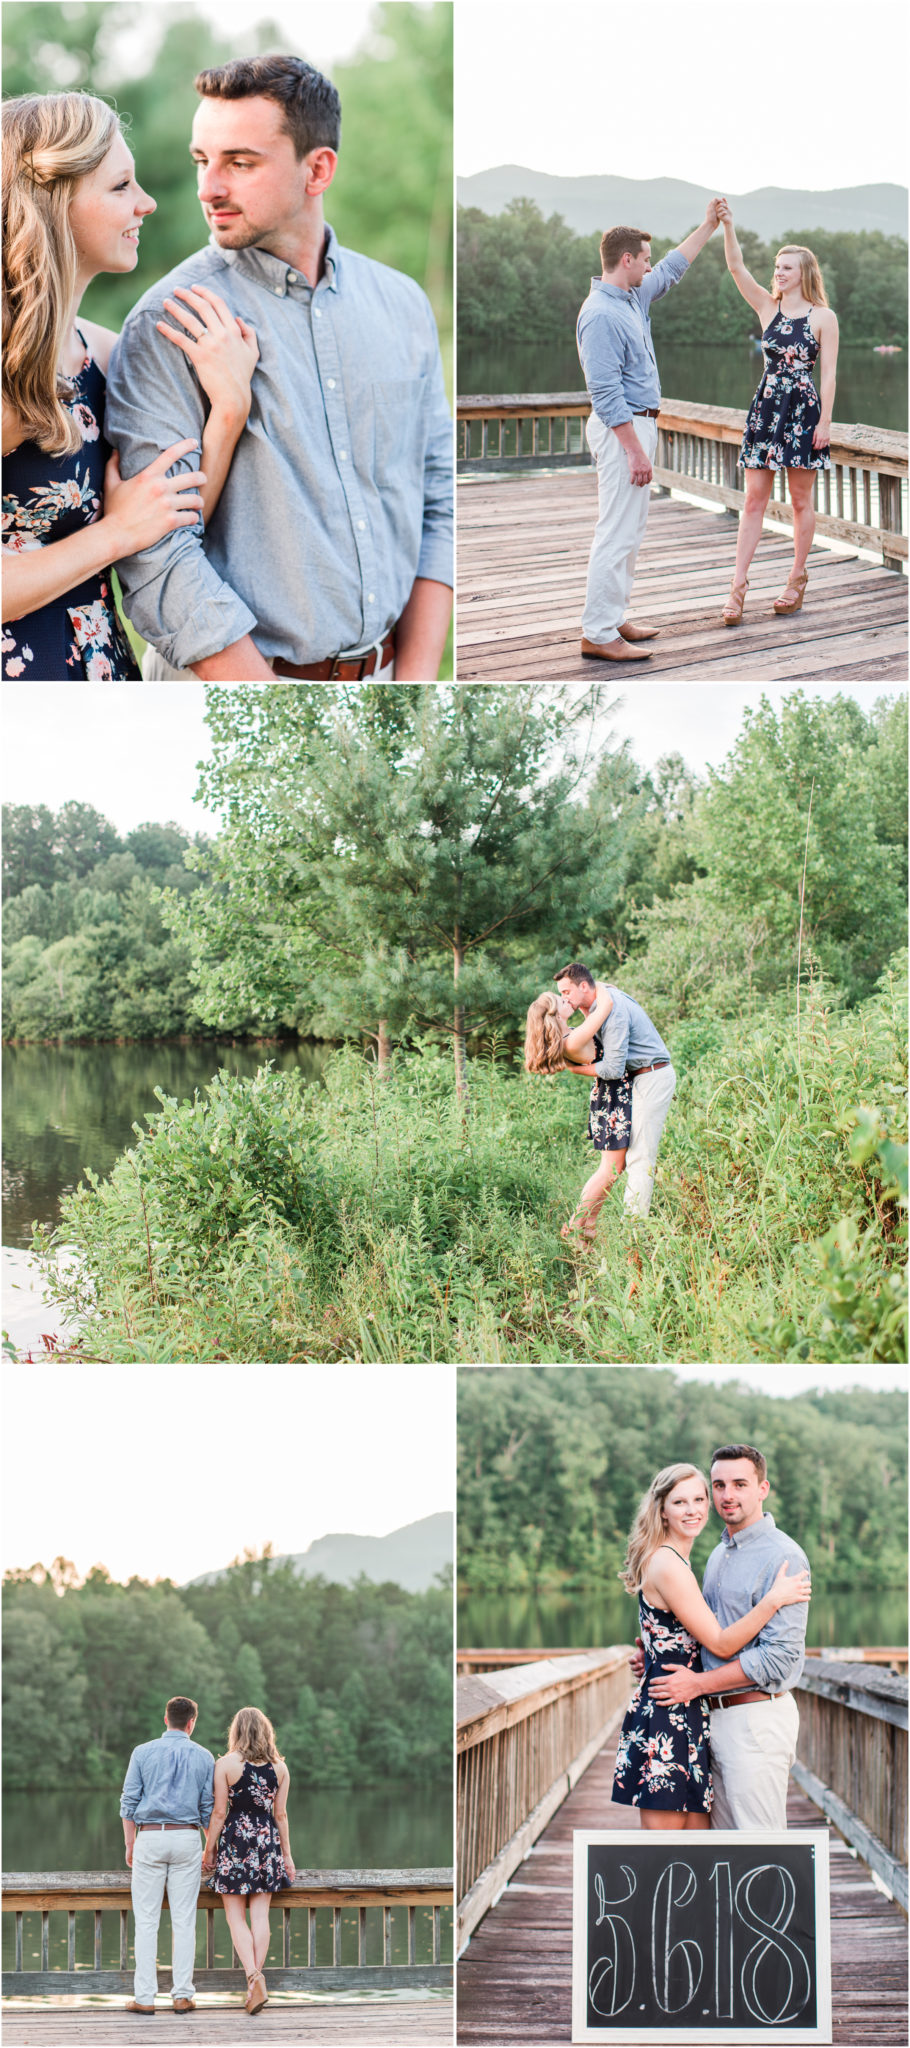 Summer Engagement Session by the lake